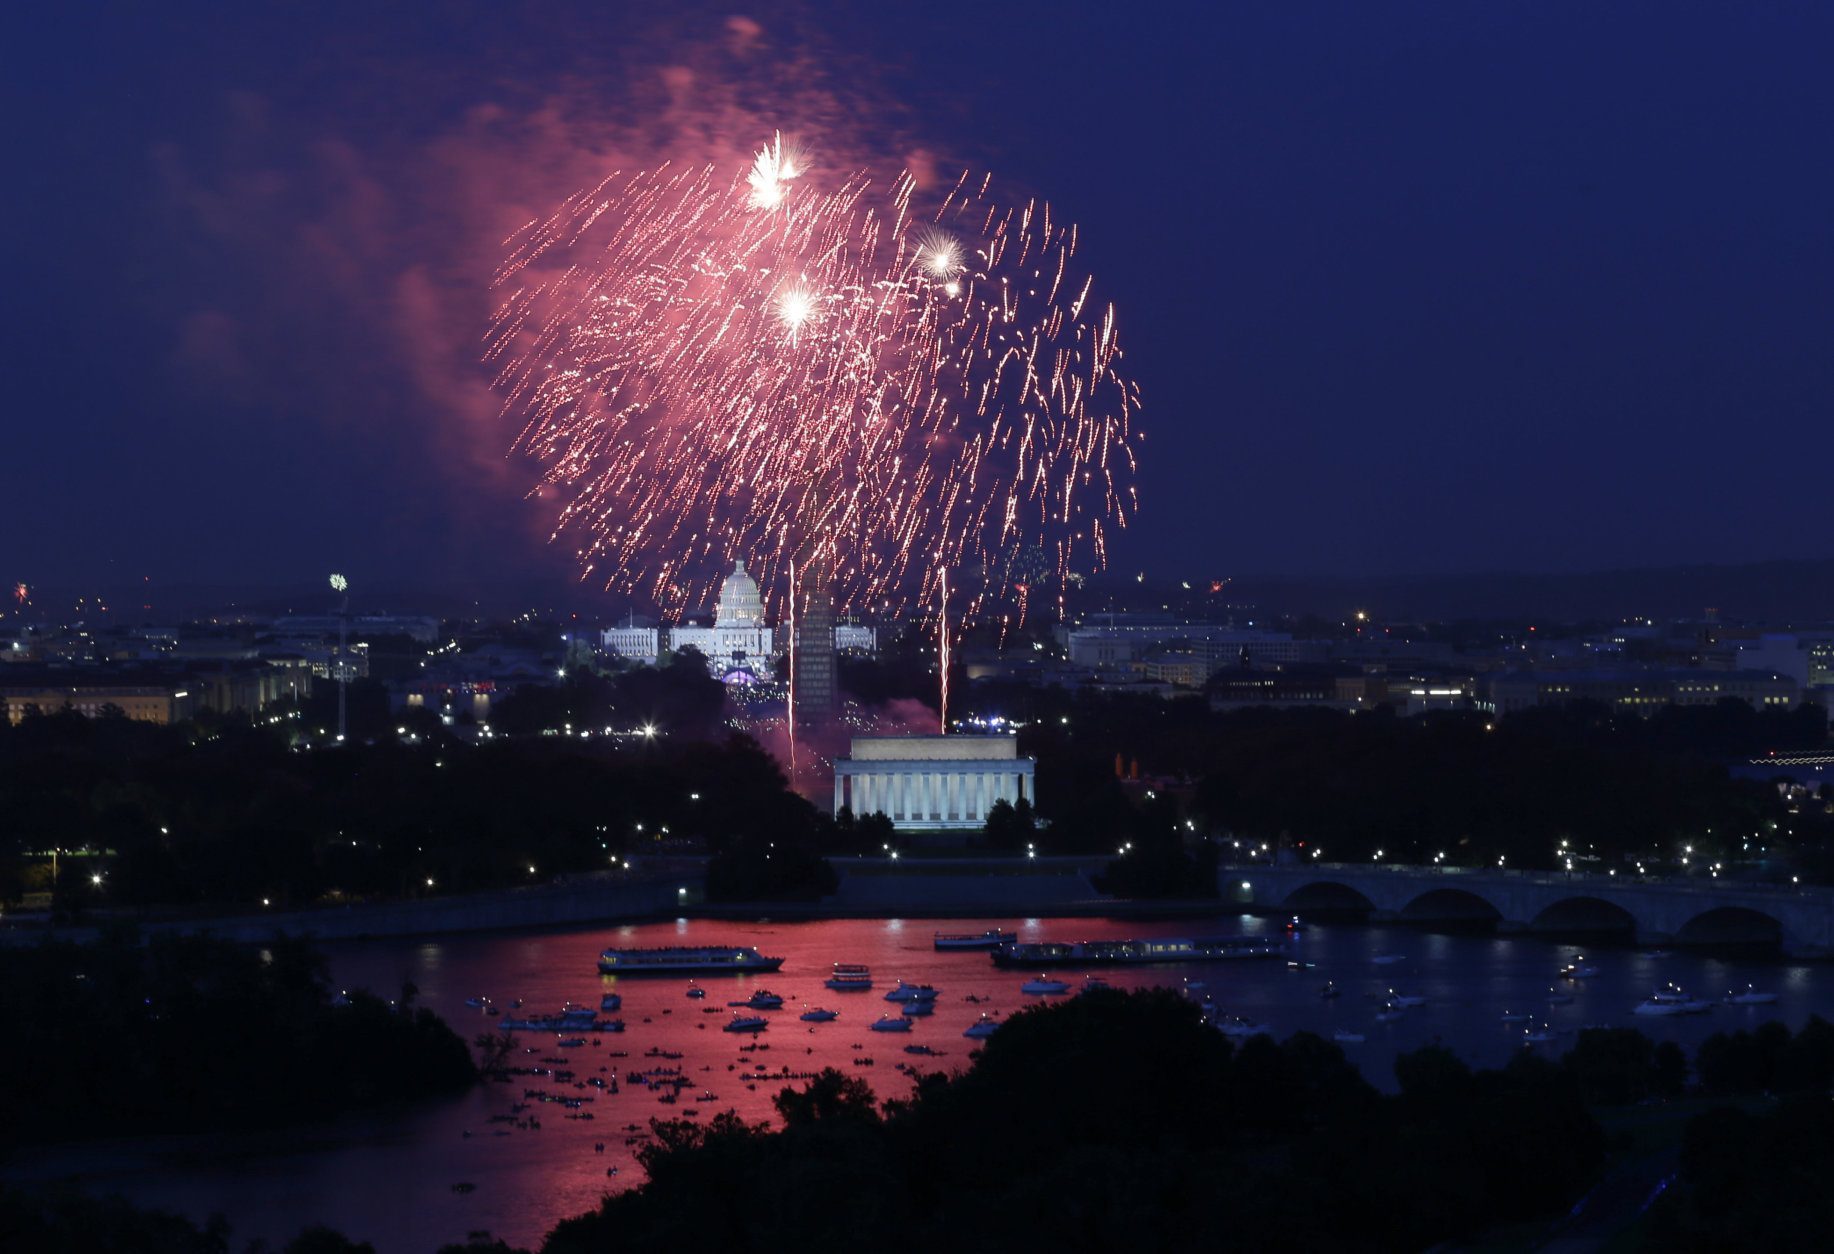 Fireworks light the sky over the U.S. Capitol, left, the Washington Monument and the Lincoln Memorial during Fourth of July celebrations, Thursday, July 4, 2013 in Washington. Surrounded by scaffolding, the Washington Monument is closed for repairs after an earthquake in 2011. (AP Photo/Alex Brandon)